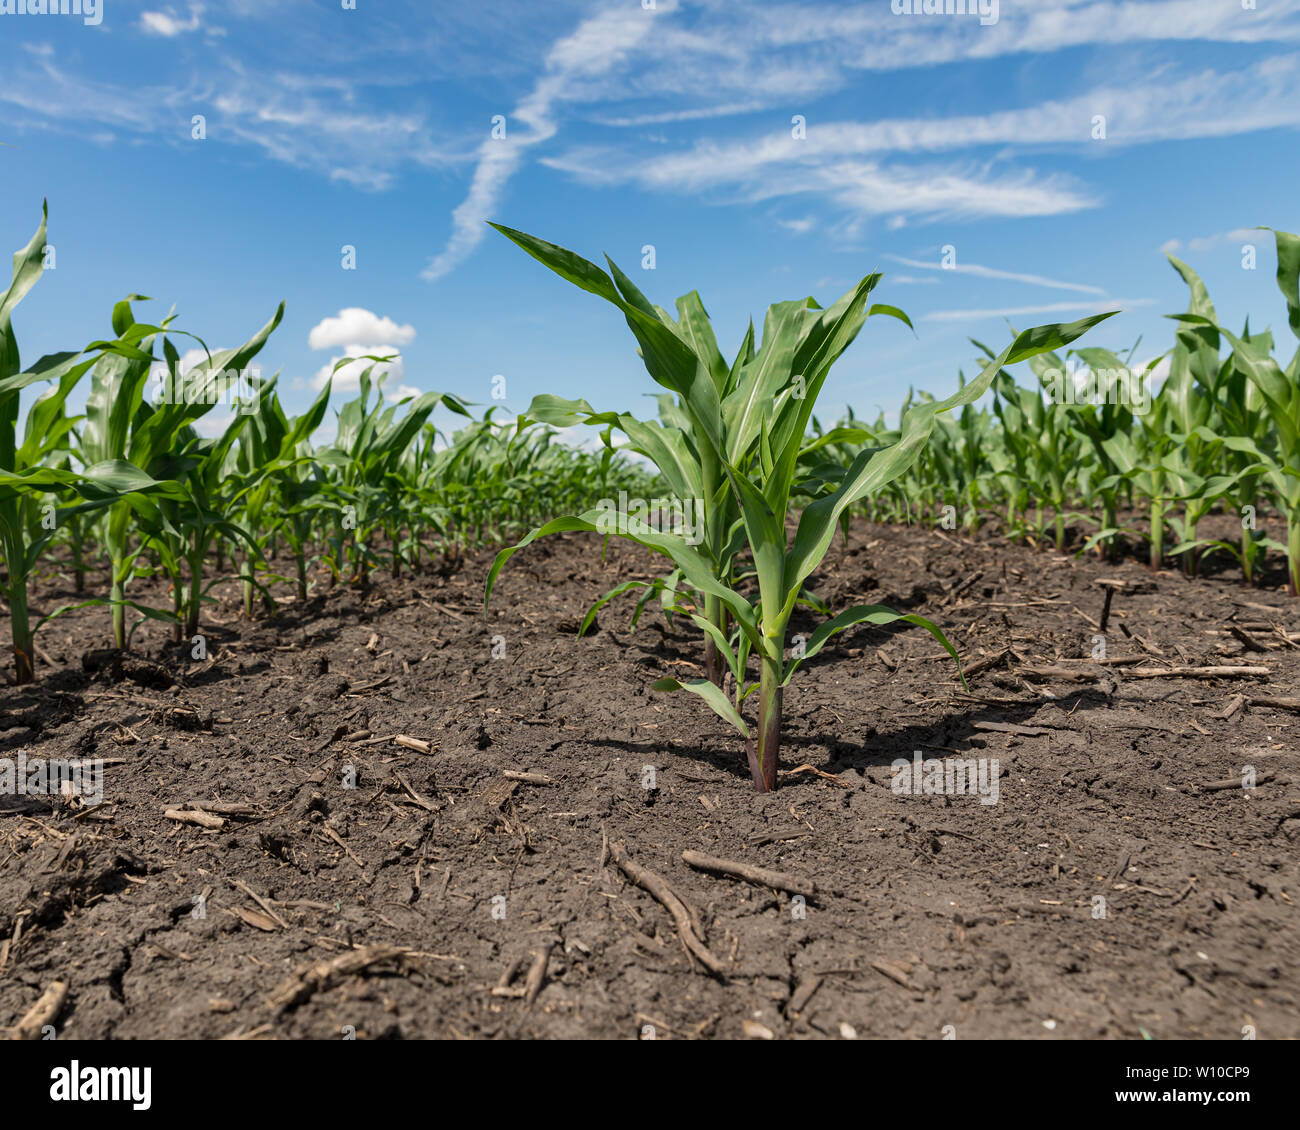 Healthy young corn plants growing in rows in cornfield with no weeds Stock Photo